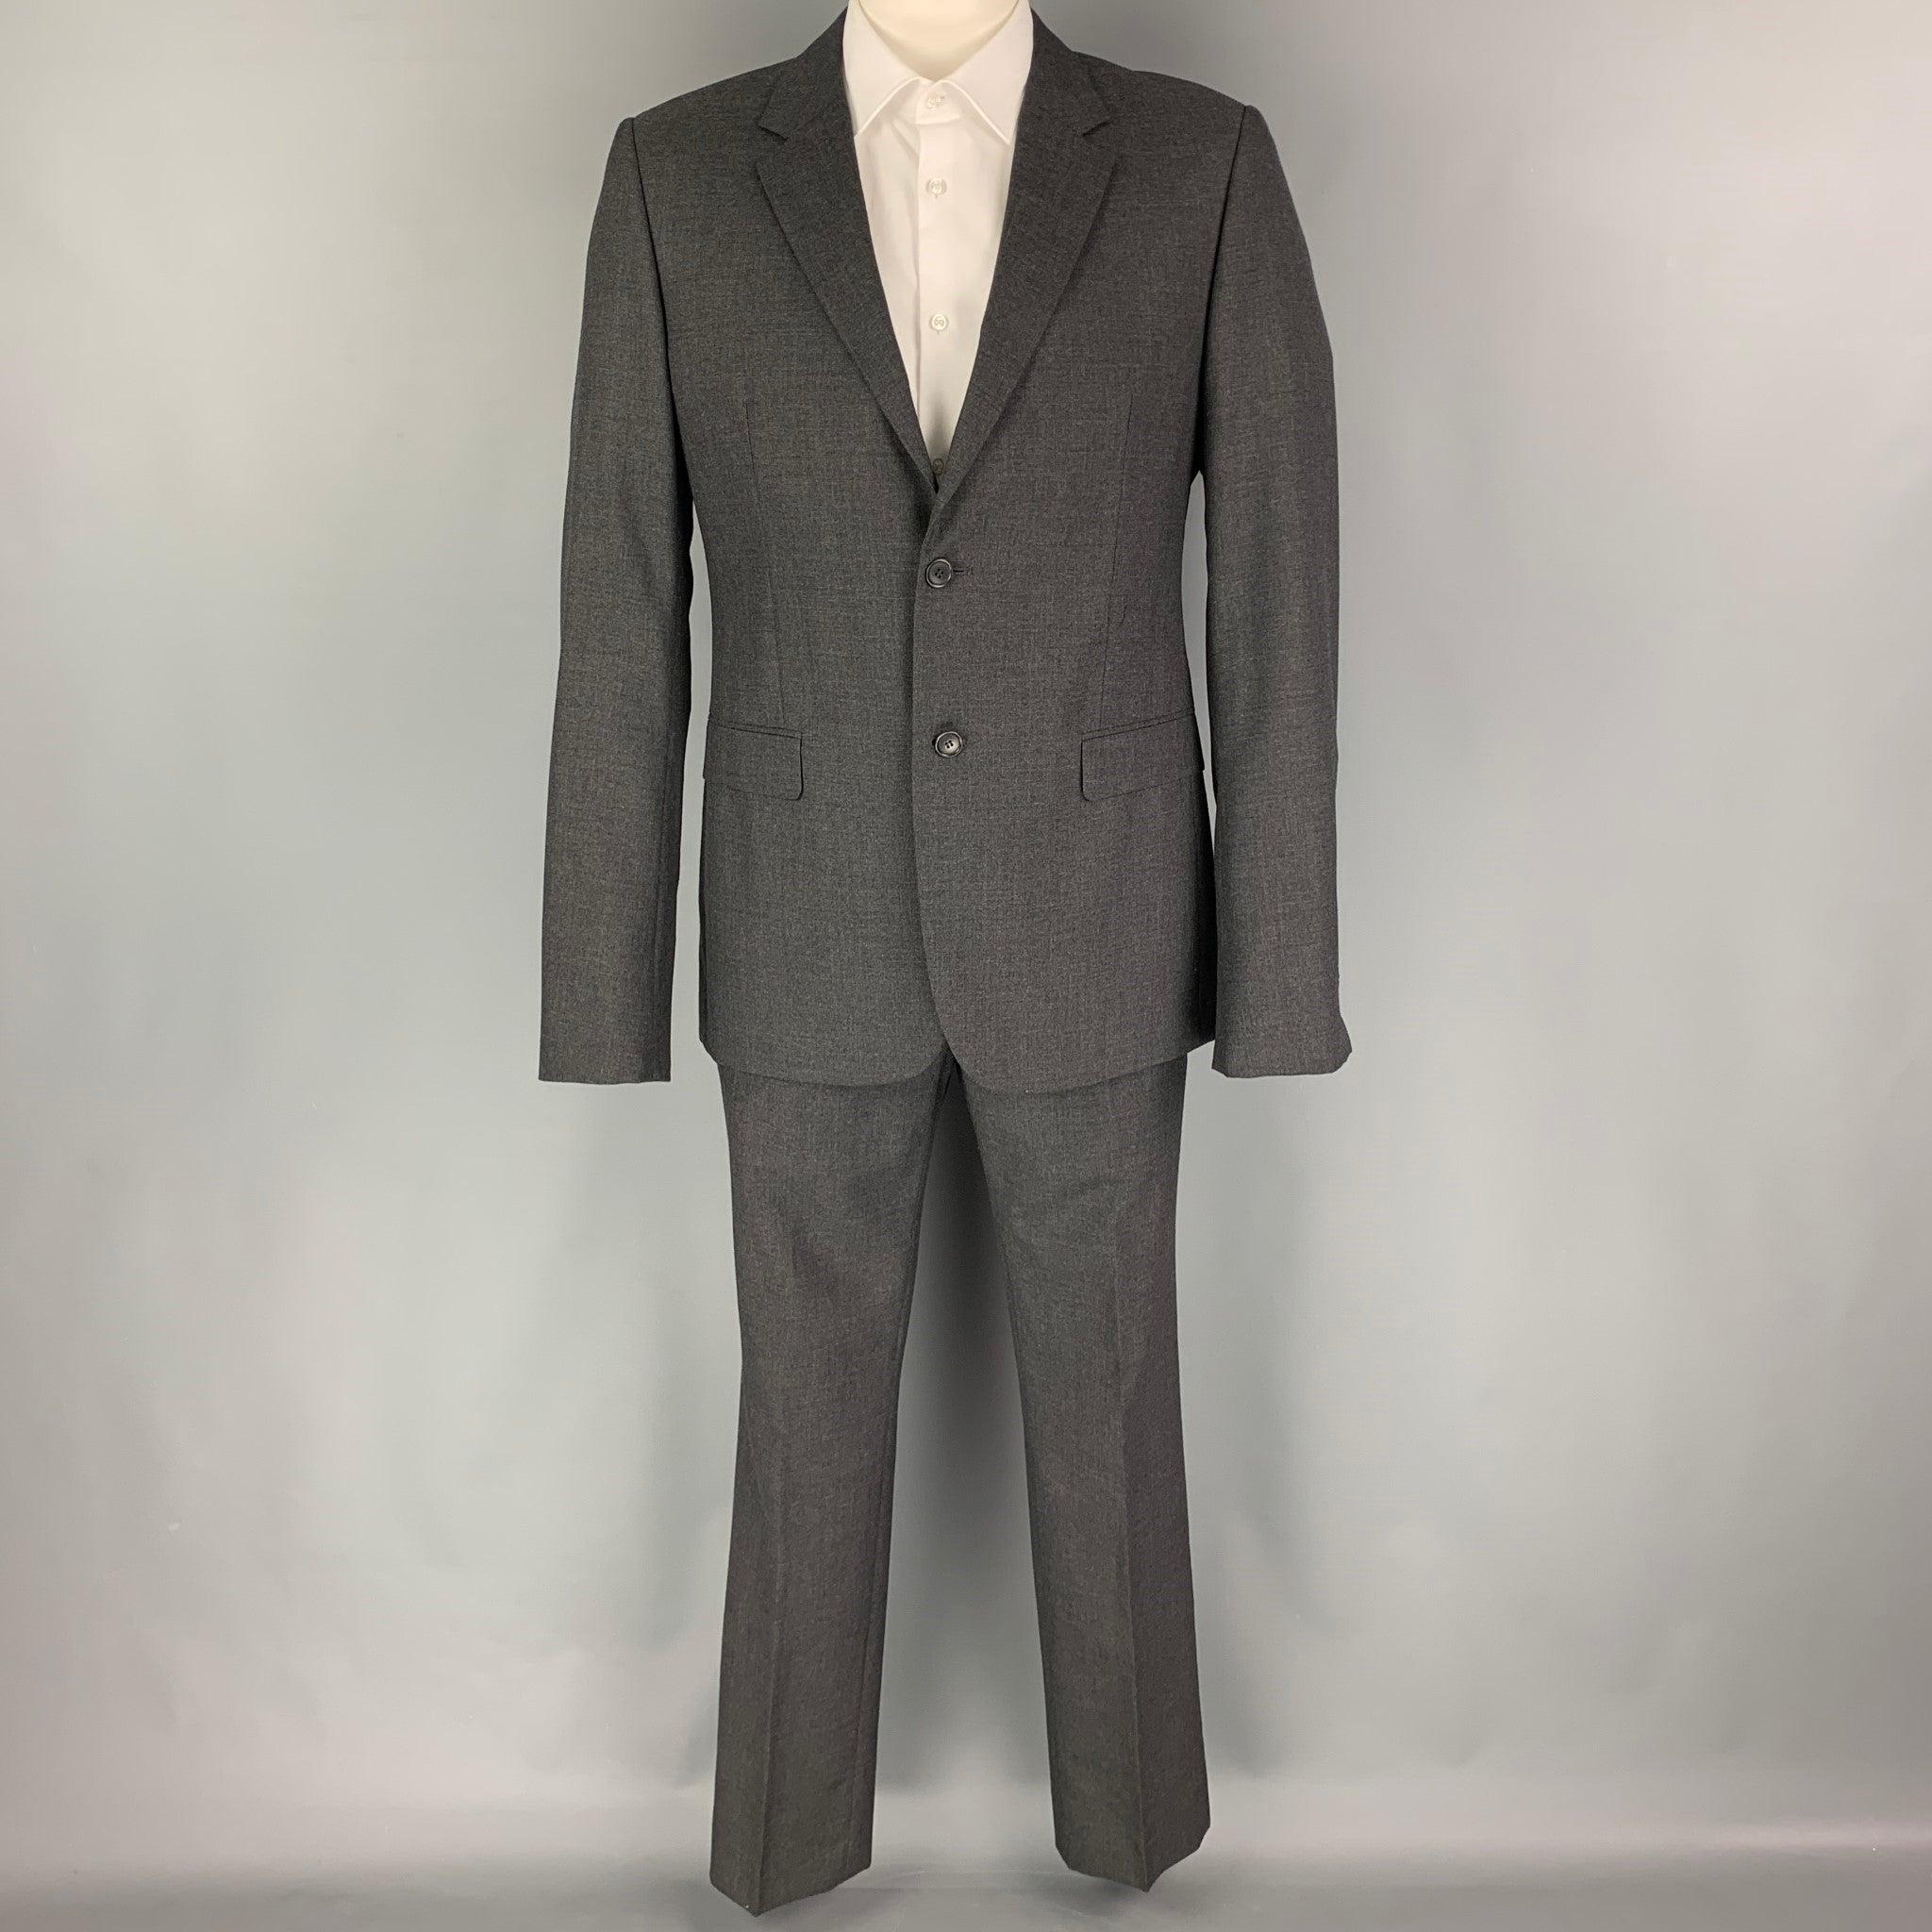 CALVIN KLEIN COLLECTION
suit comes in a charcoal wool with a full liner and includes a single breasted,
 double button sport coat with a notch lapel and matching flat front trousers. Excellent Pre-Owned Condition. 

Marked:   52/41 

Measurements: 
